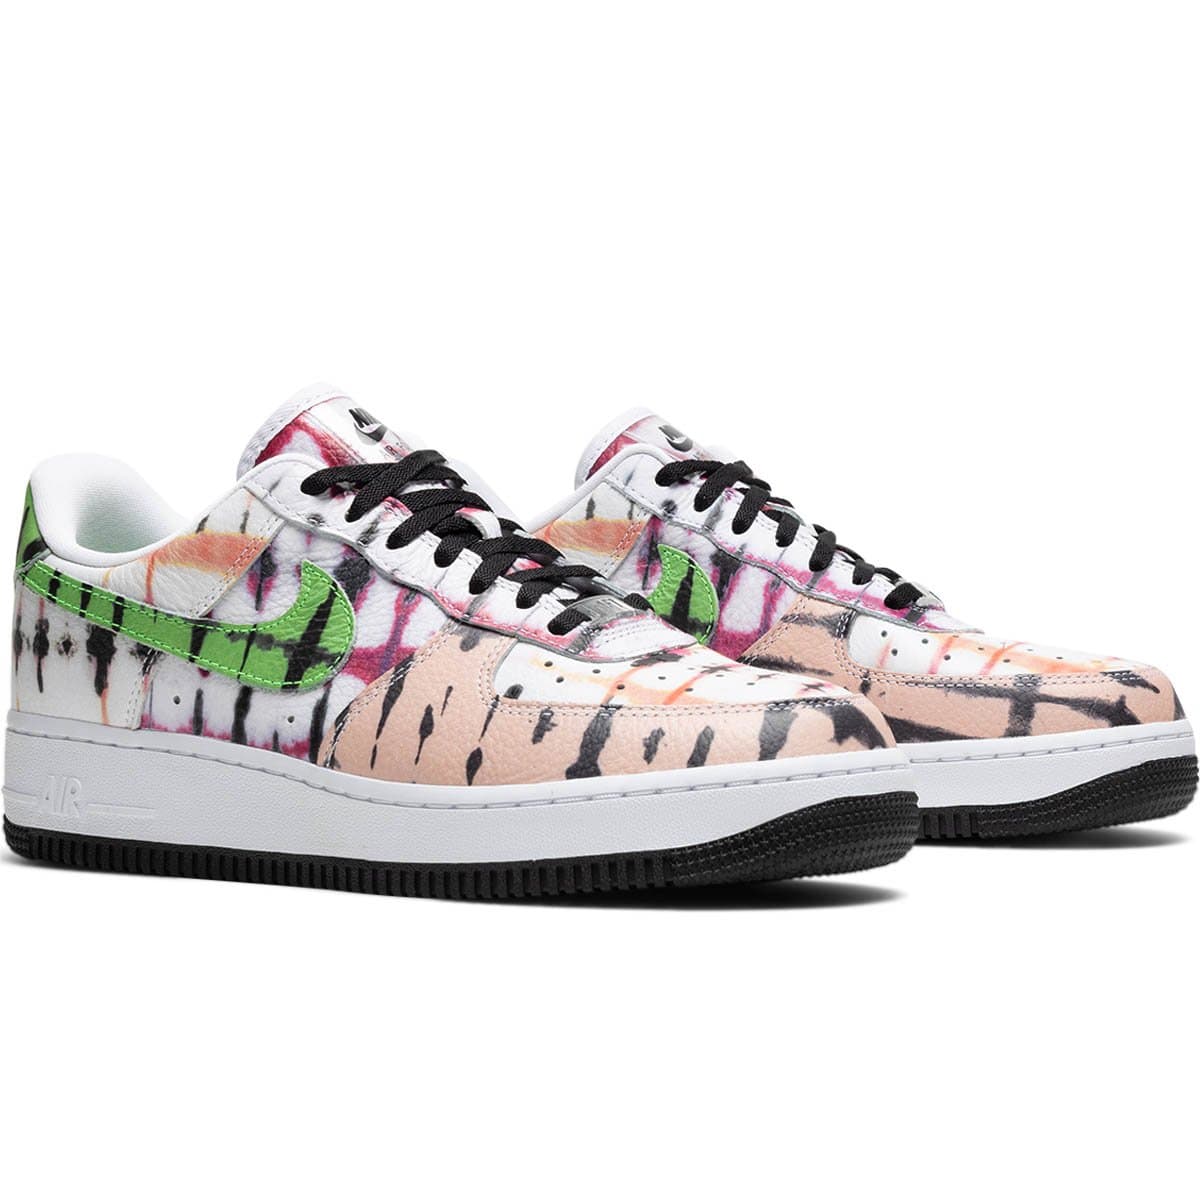 Nike Shoes WOMEN'S AIR FORCE 1 '07